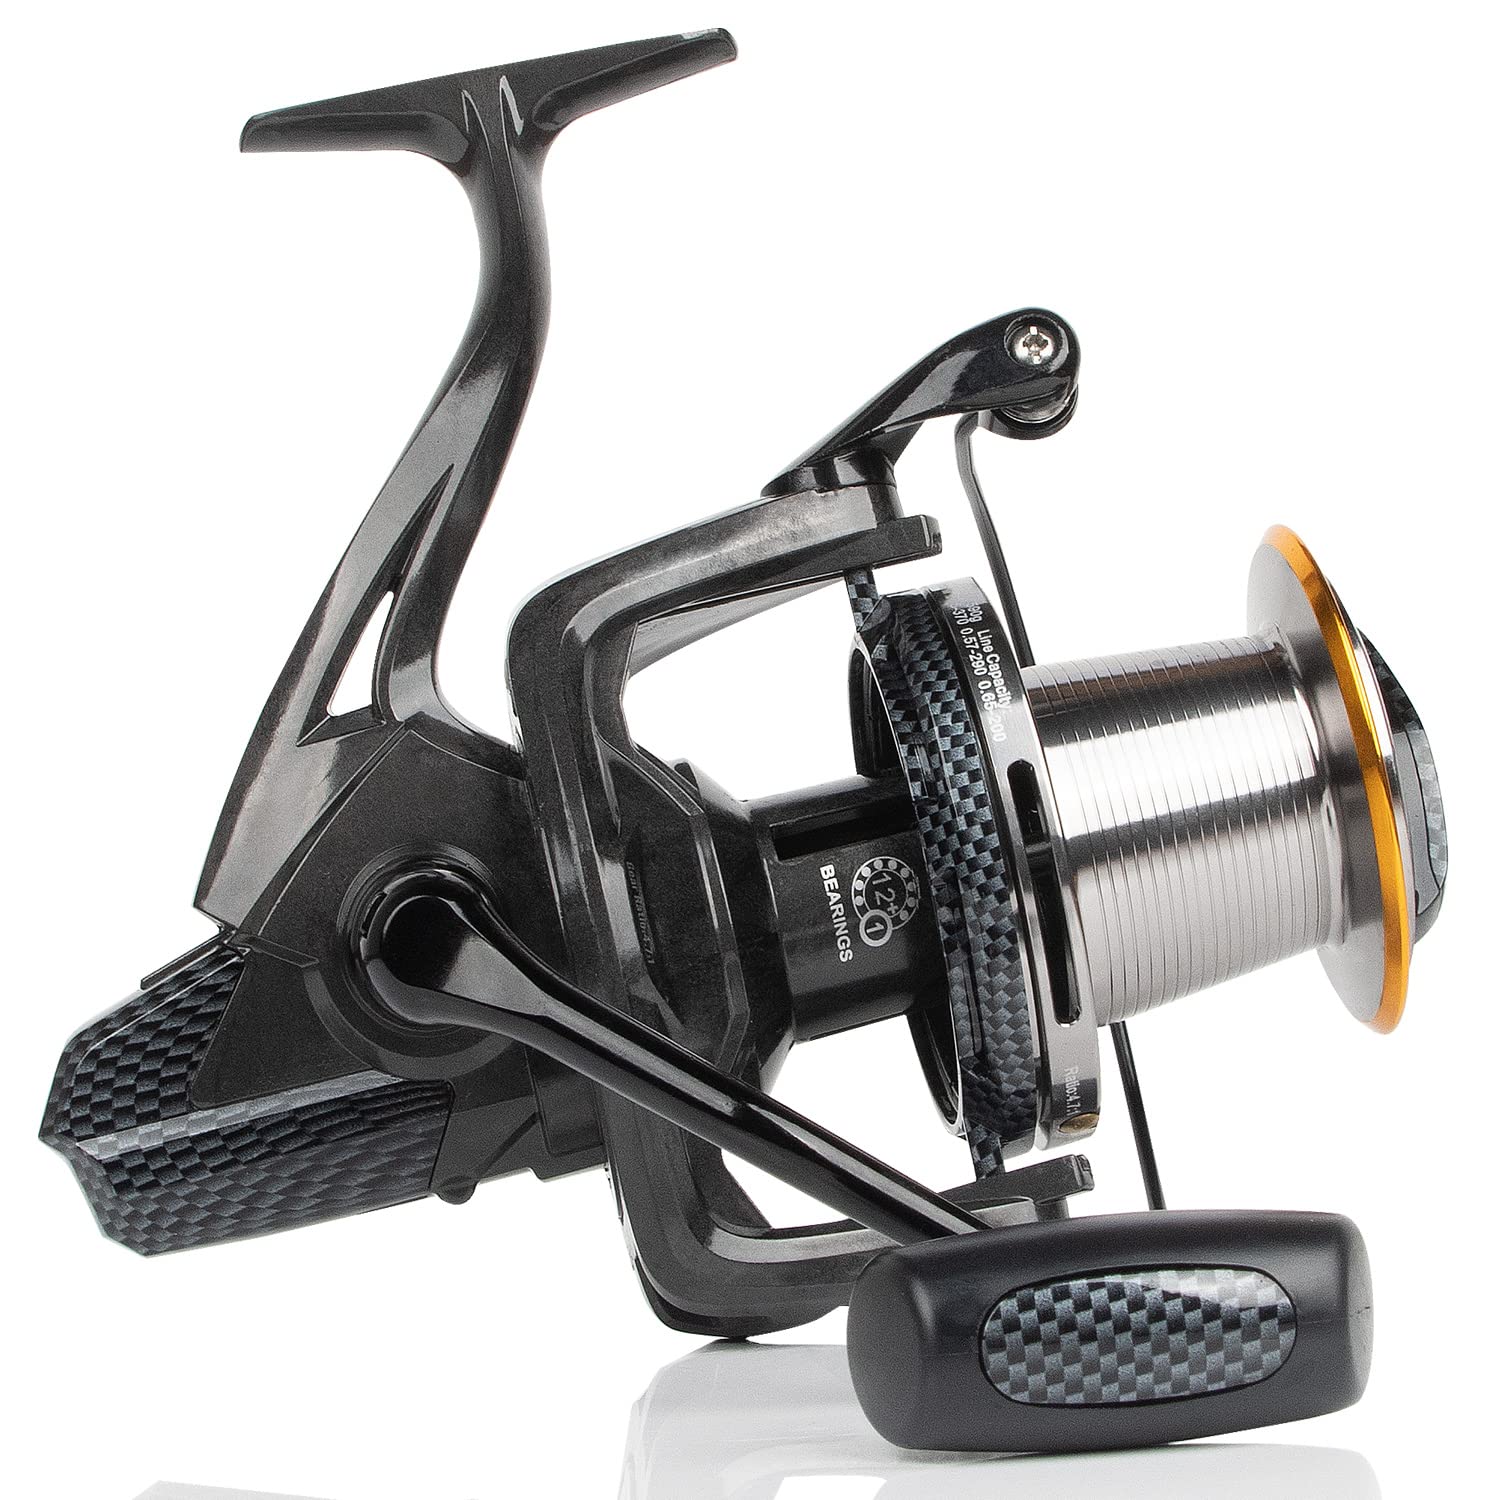 HPLIFE Surf Fishing Reel, 18.7oz Carbon Fiber Spinning Reel  8000/10000/12000 Long Casting Ultra Smooth 10+1 Stainless BB, 66LBS Max  Drag Power